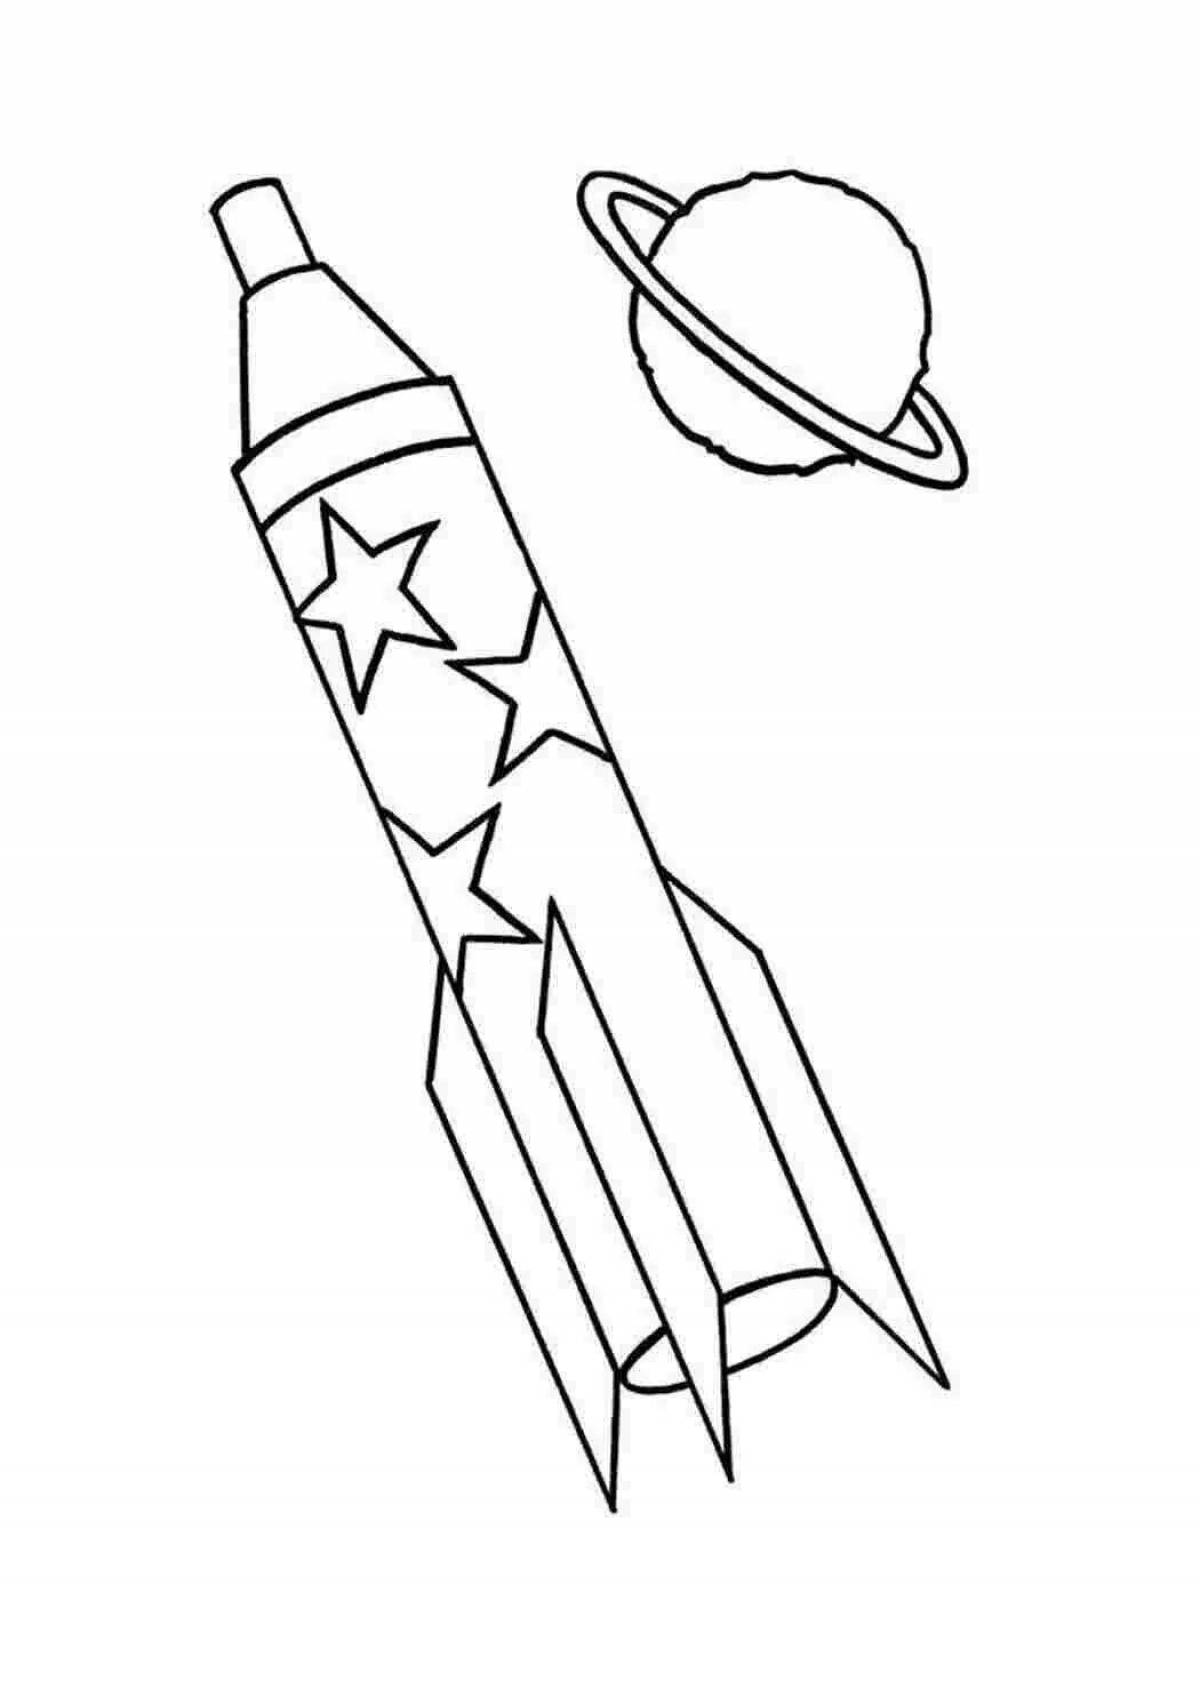 Coloring page gorgeous space rocket